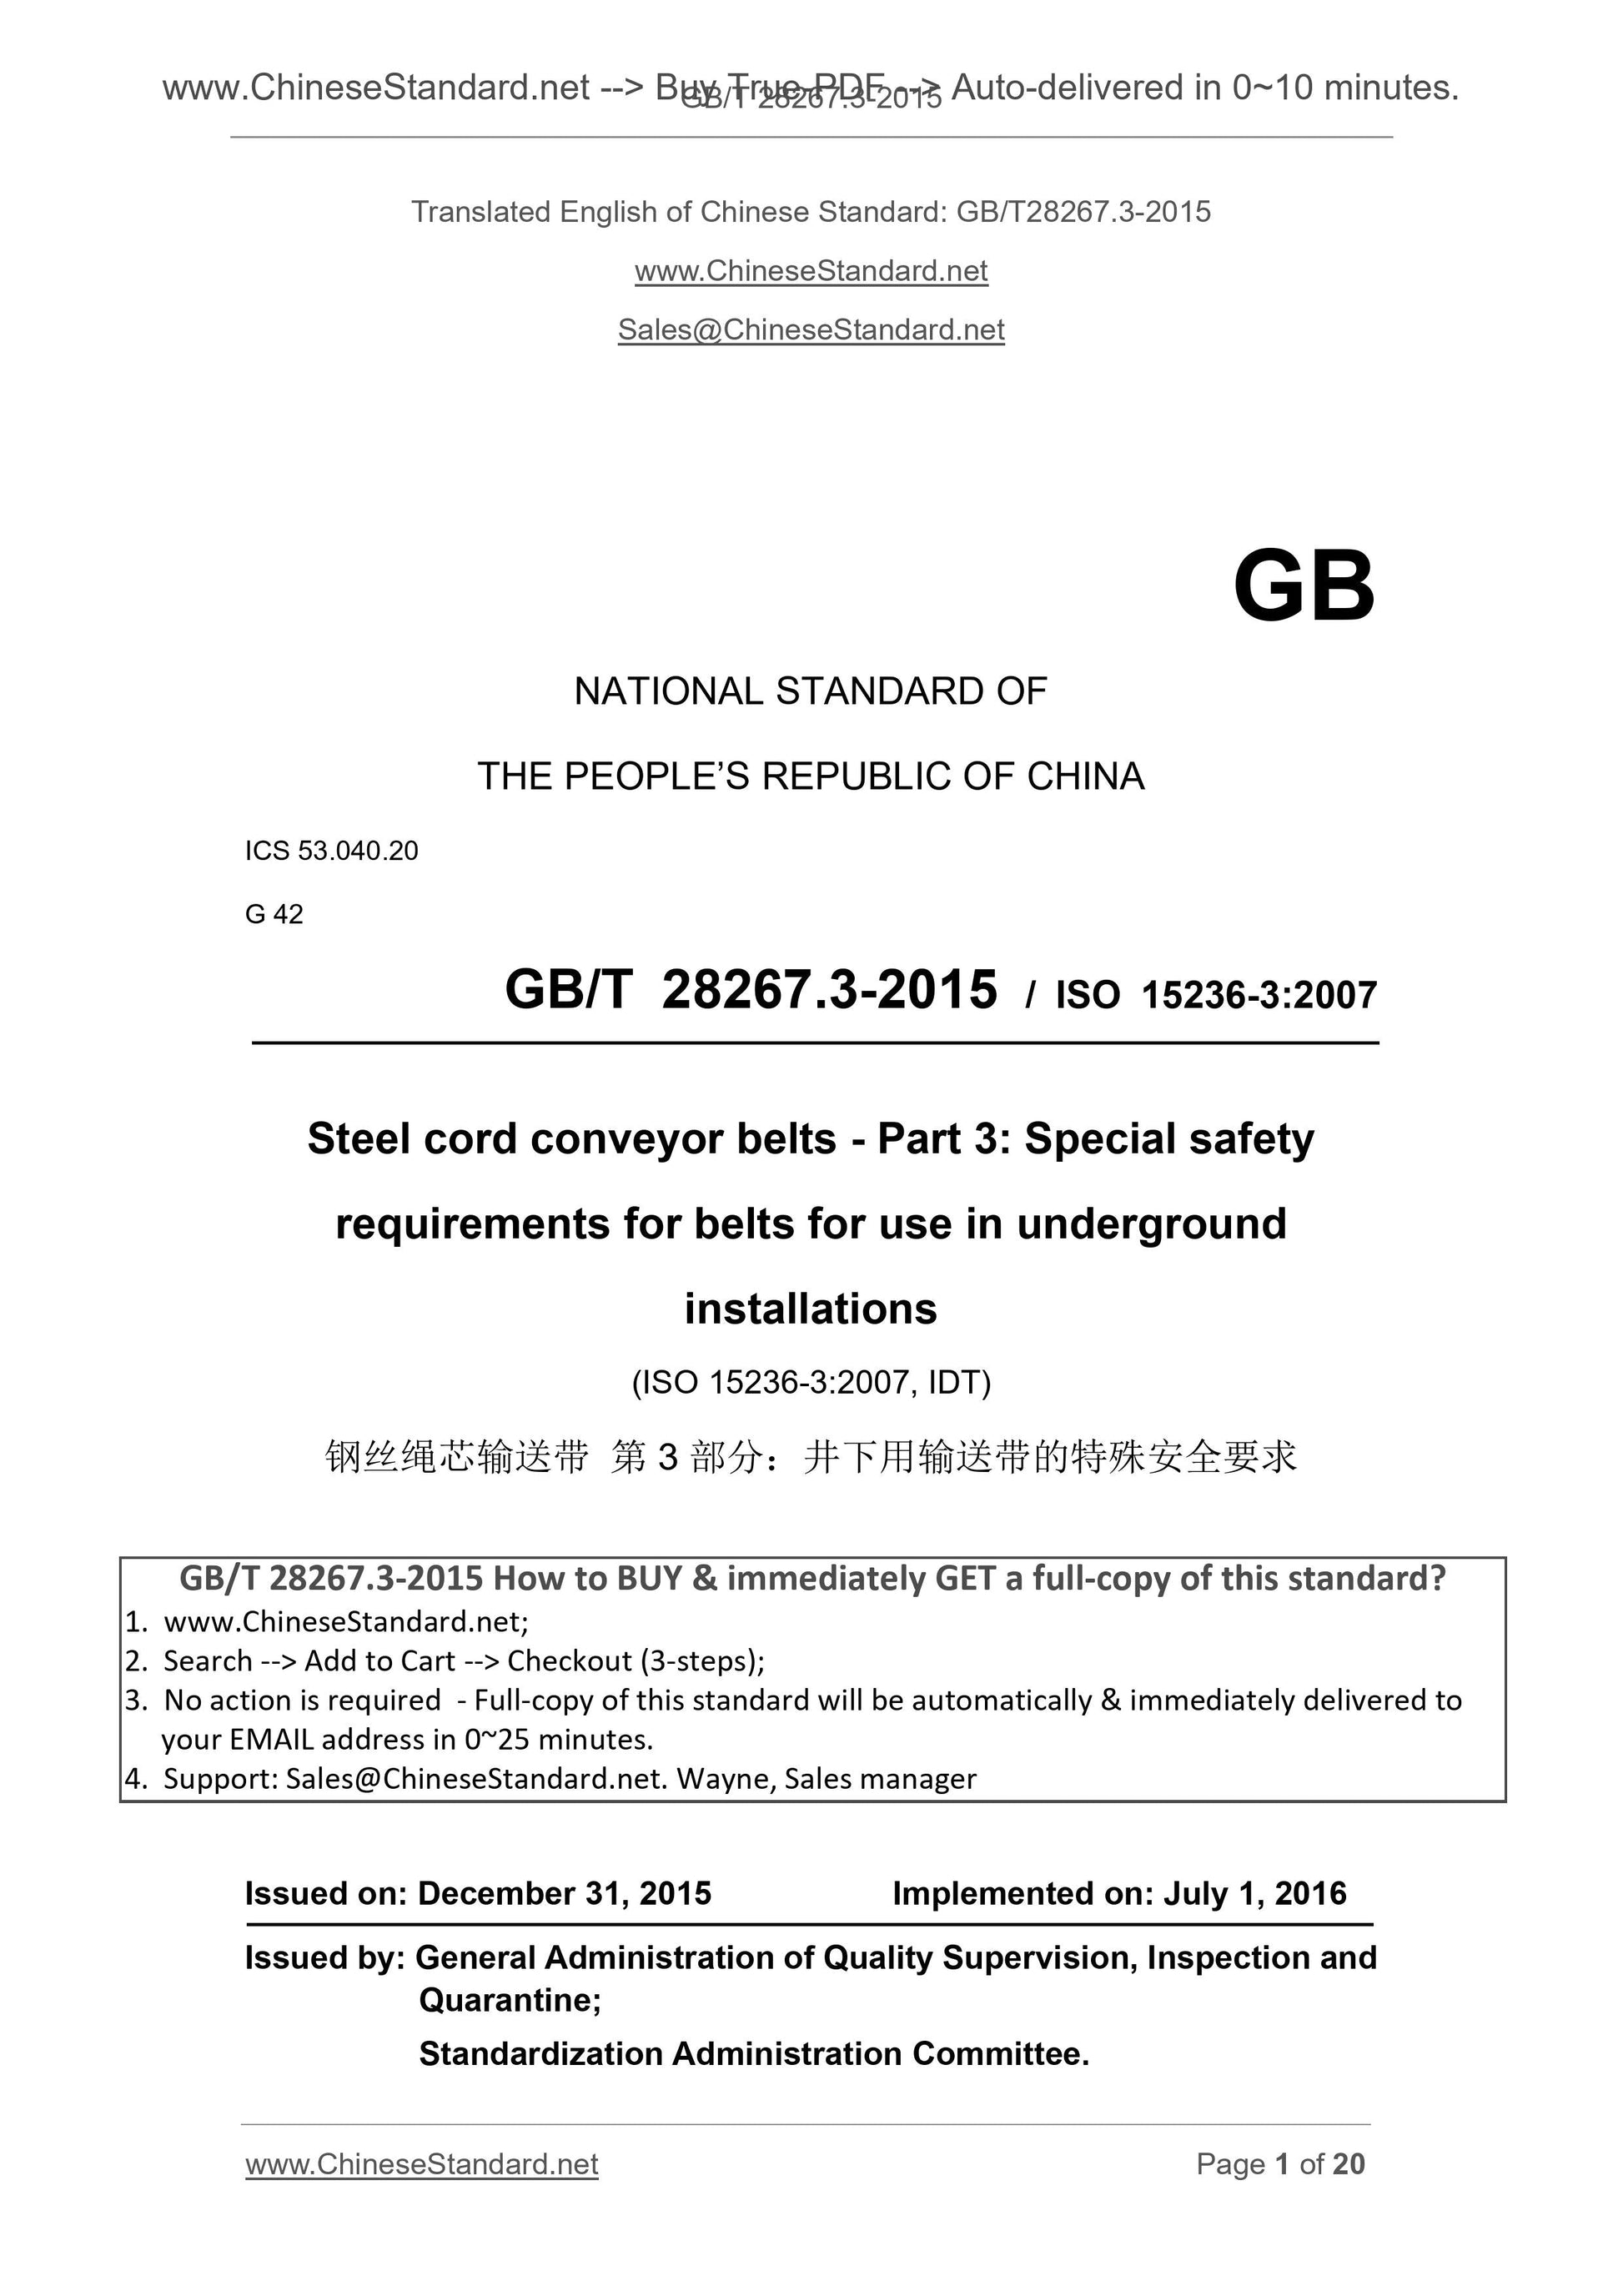 GB/T 28267.3-2015 Page 1